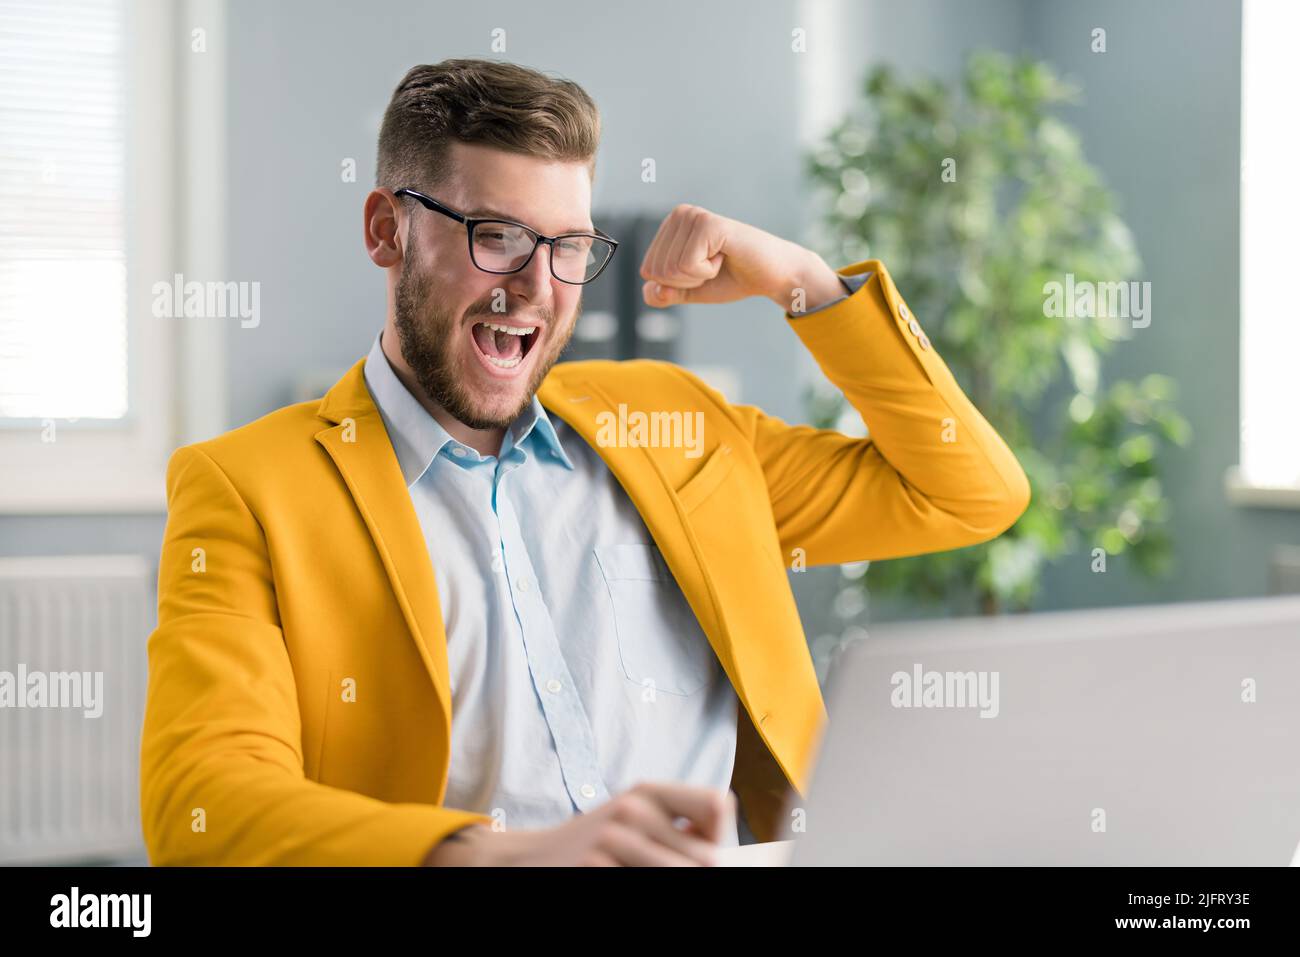 Successful employer looking at laptop screen Stock Photo